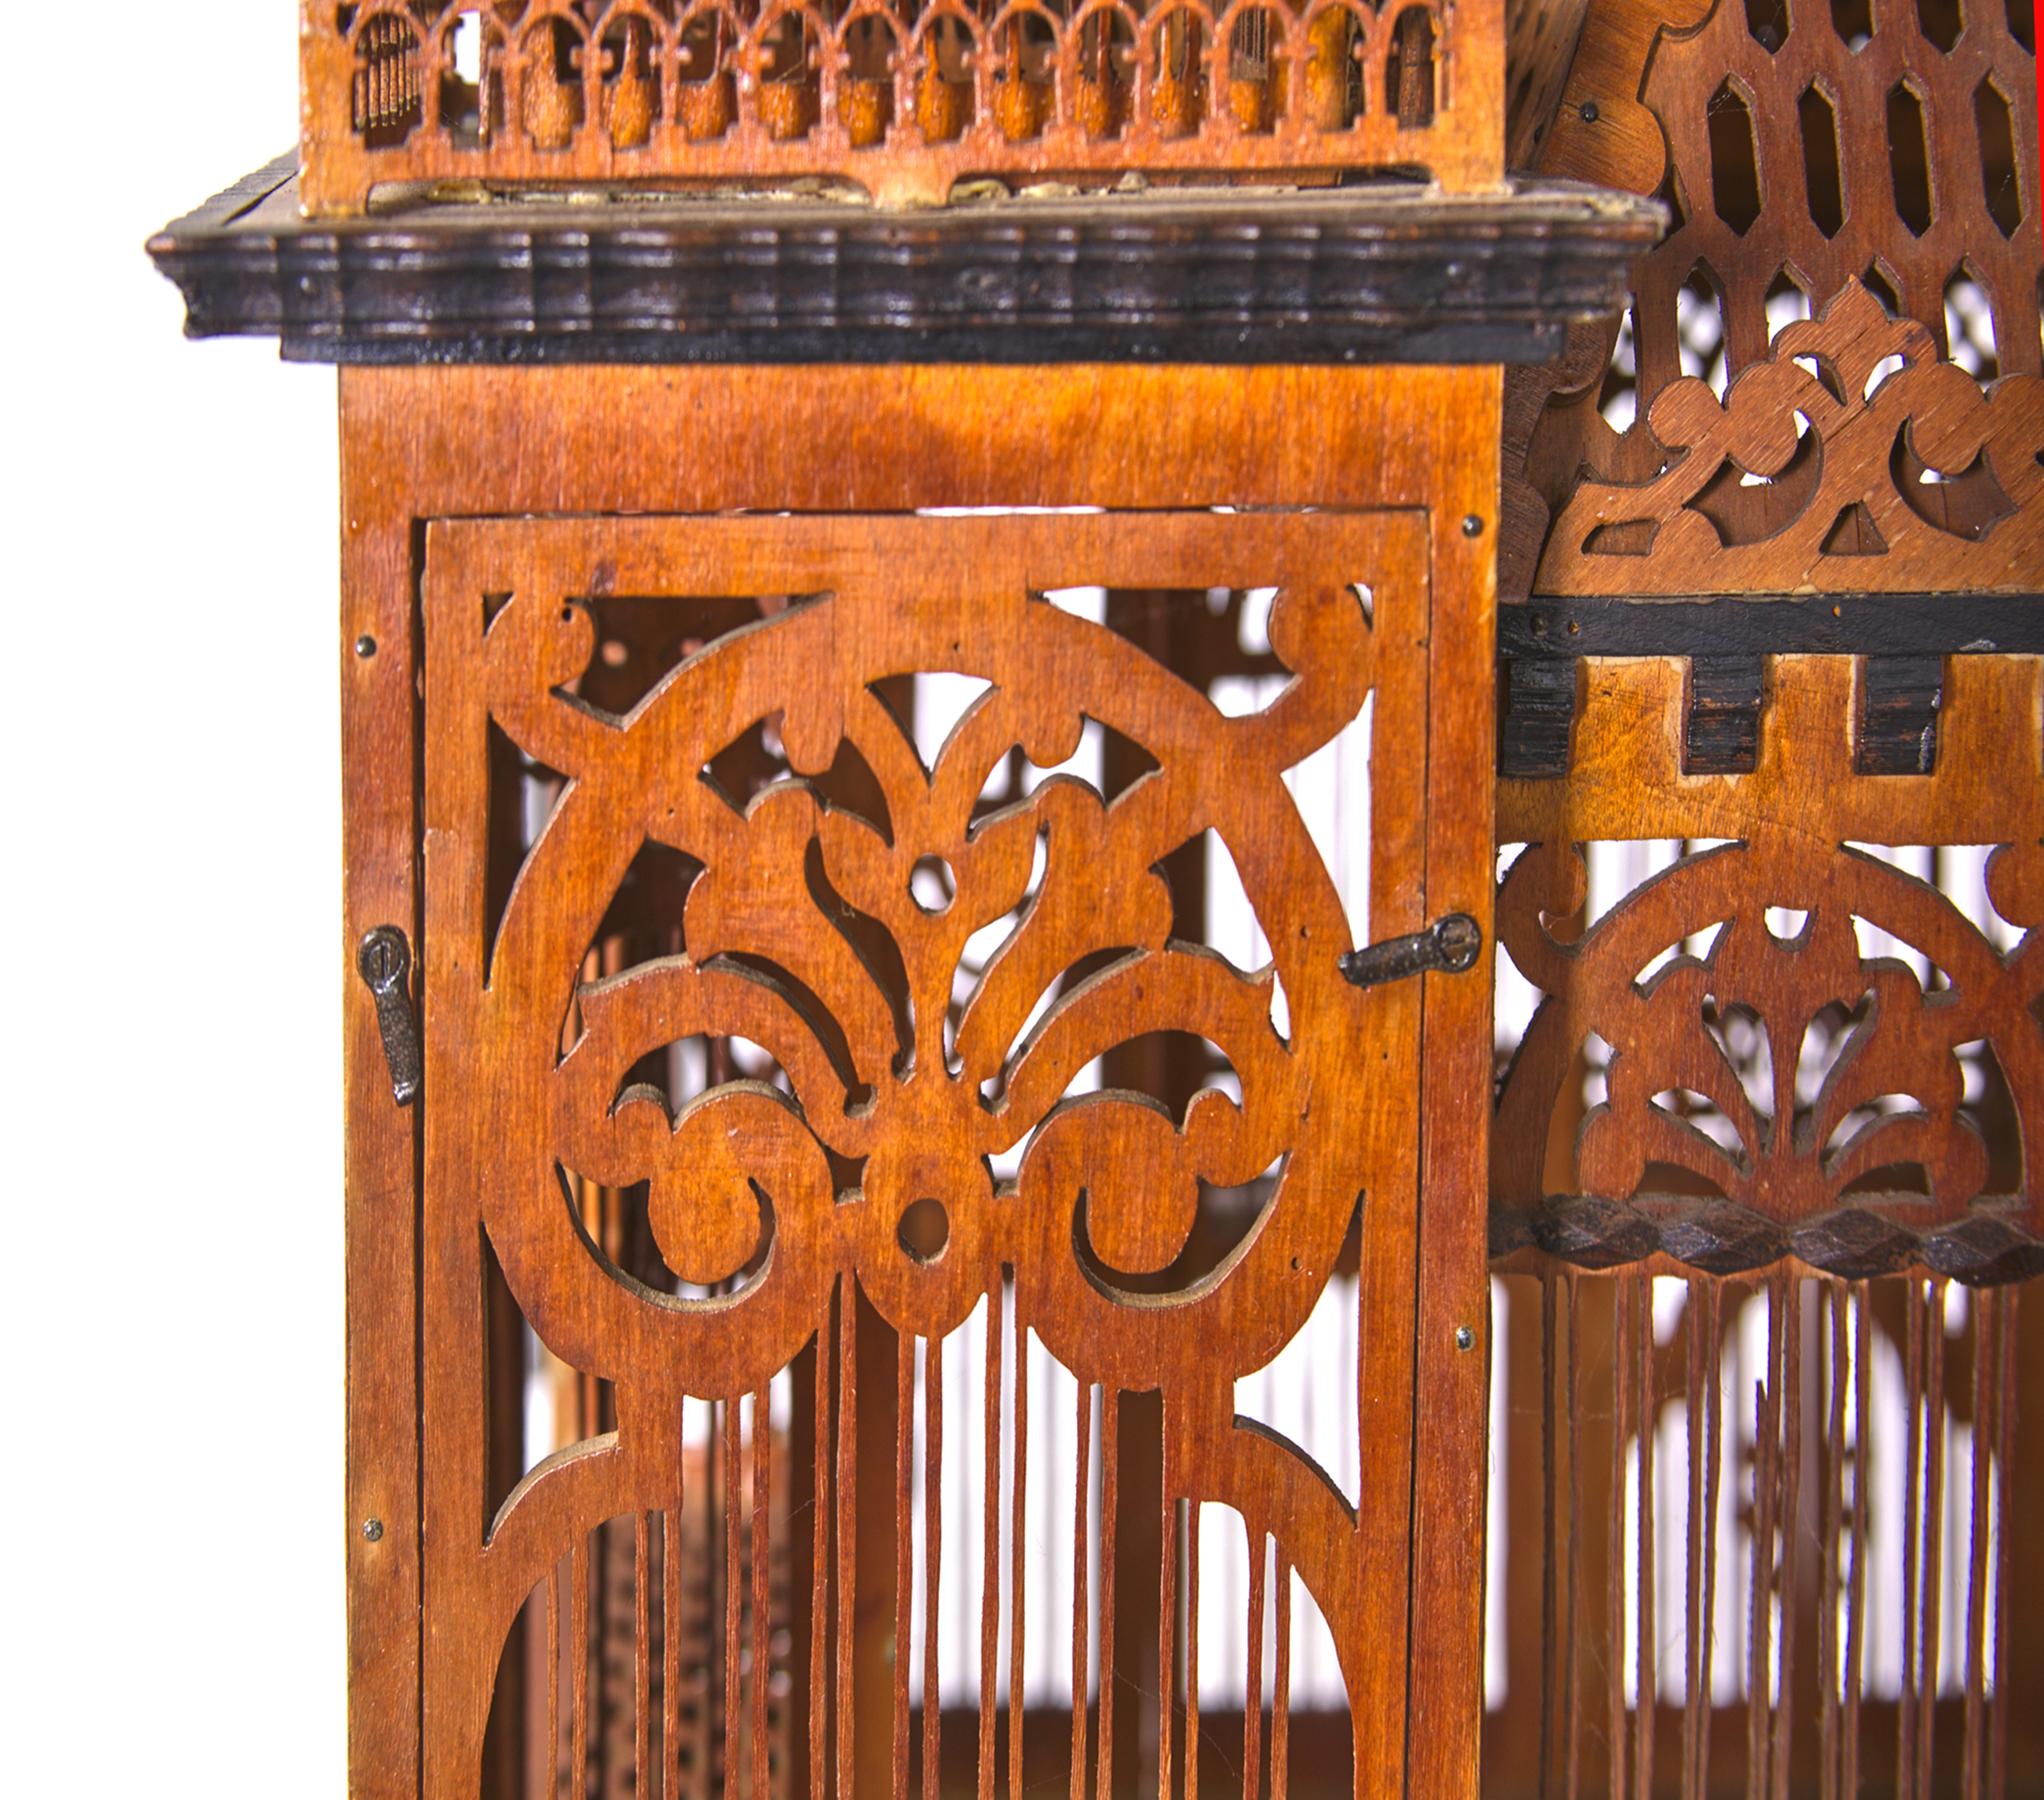 Exceptional Handmade Walnut Wood Birdcage from the Collection of Paul McDonald 7